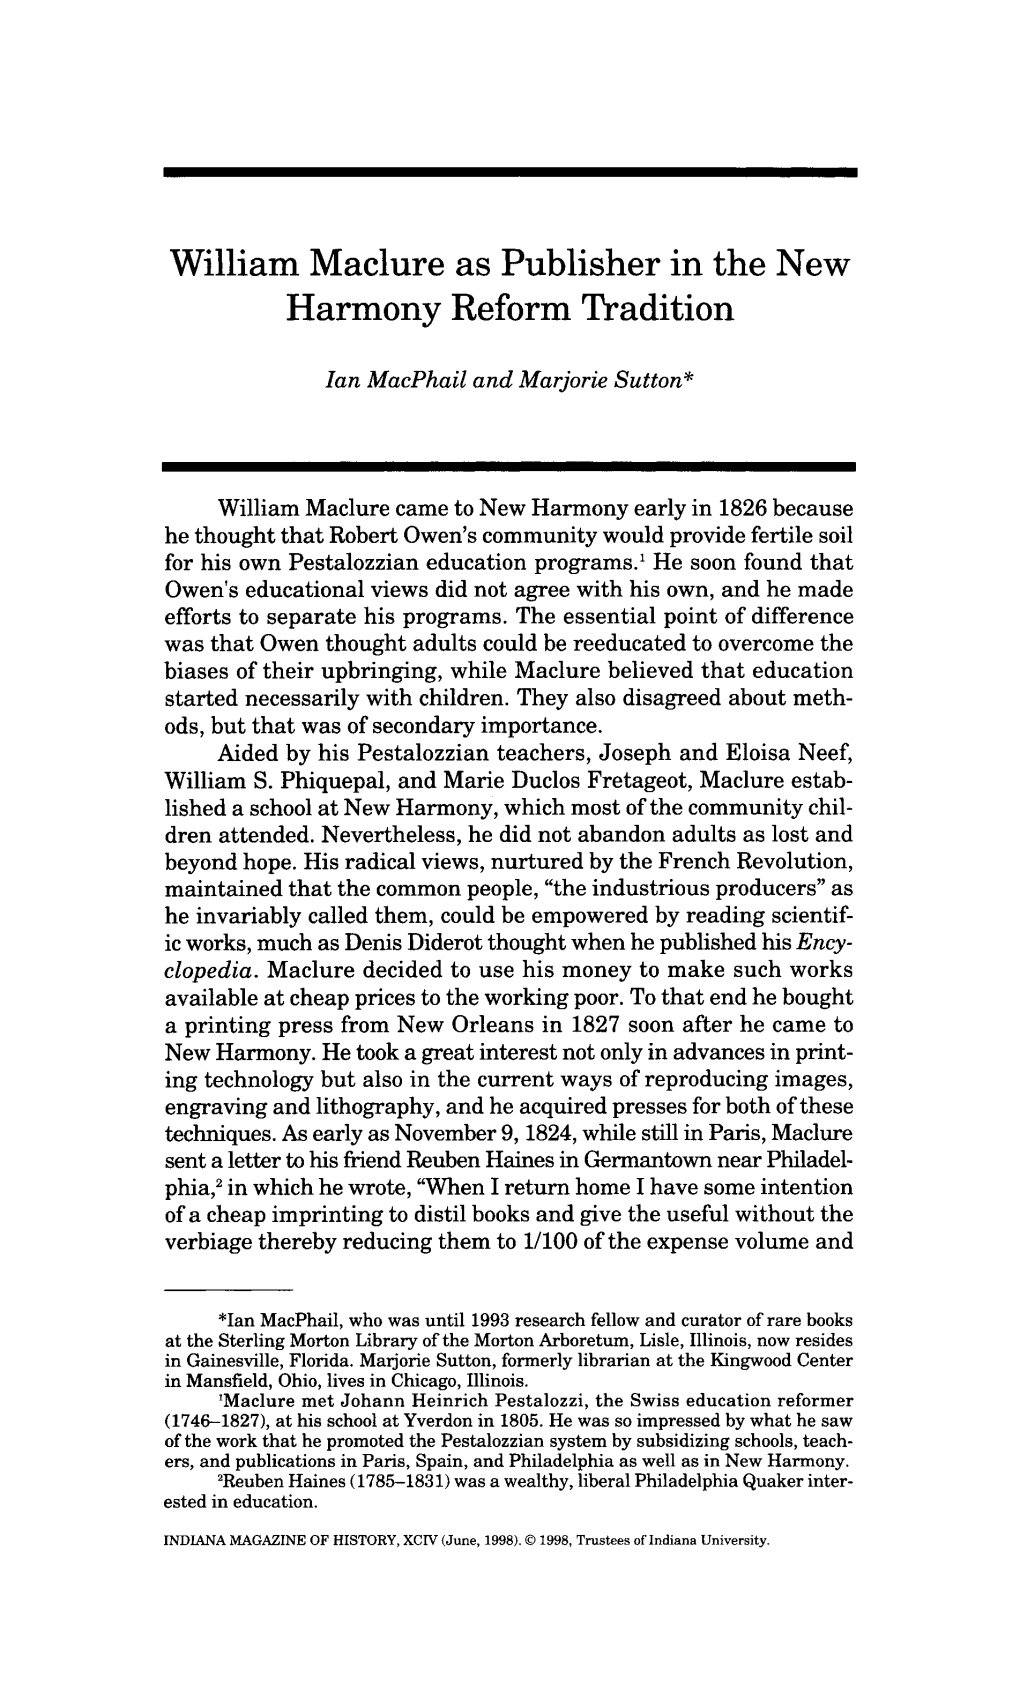 William Maclure As Publisher in the New Harmony Reform Tradition